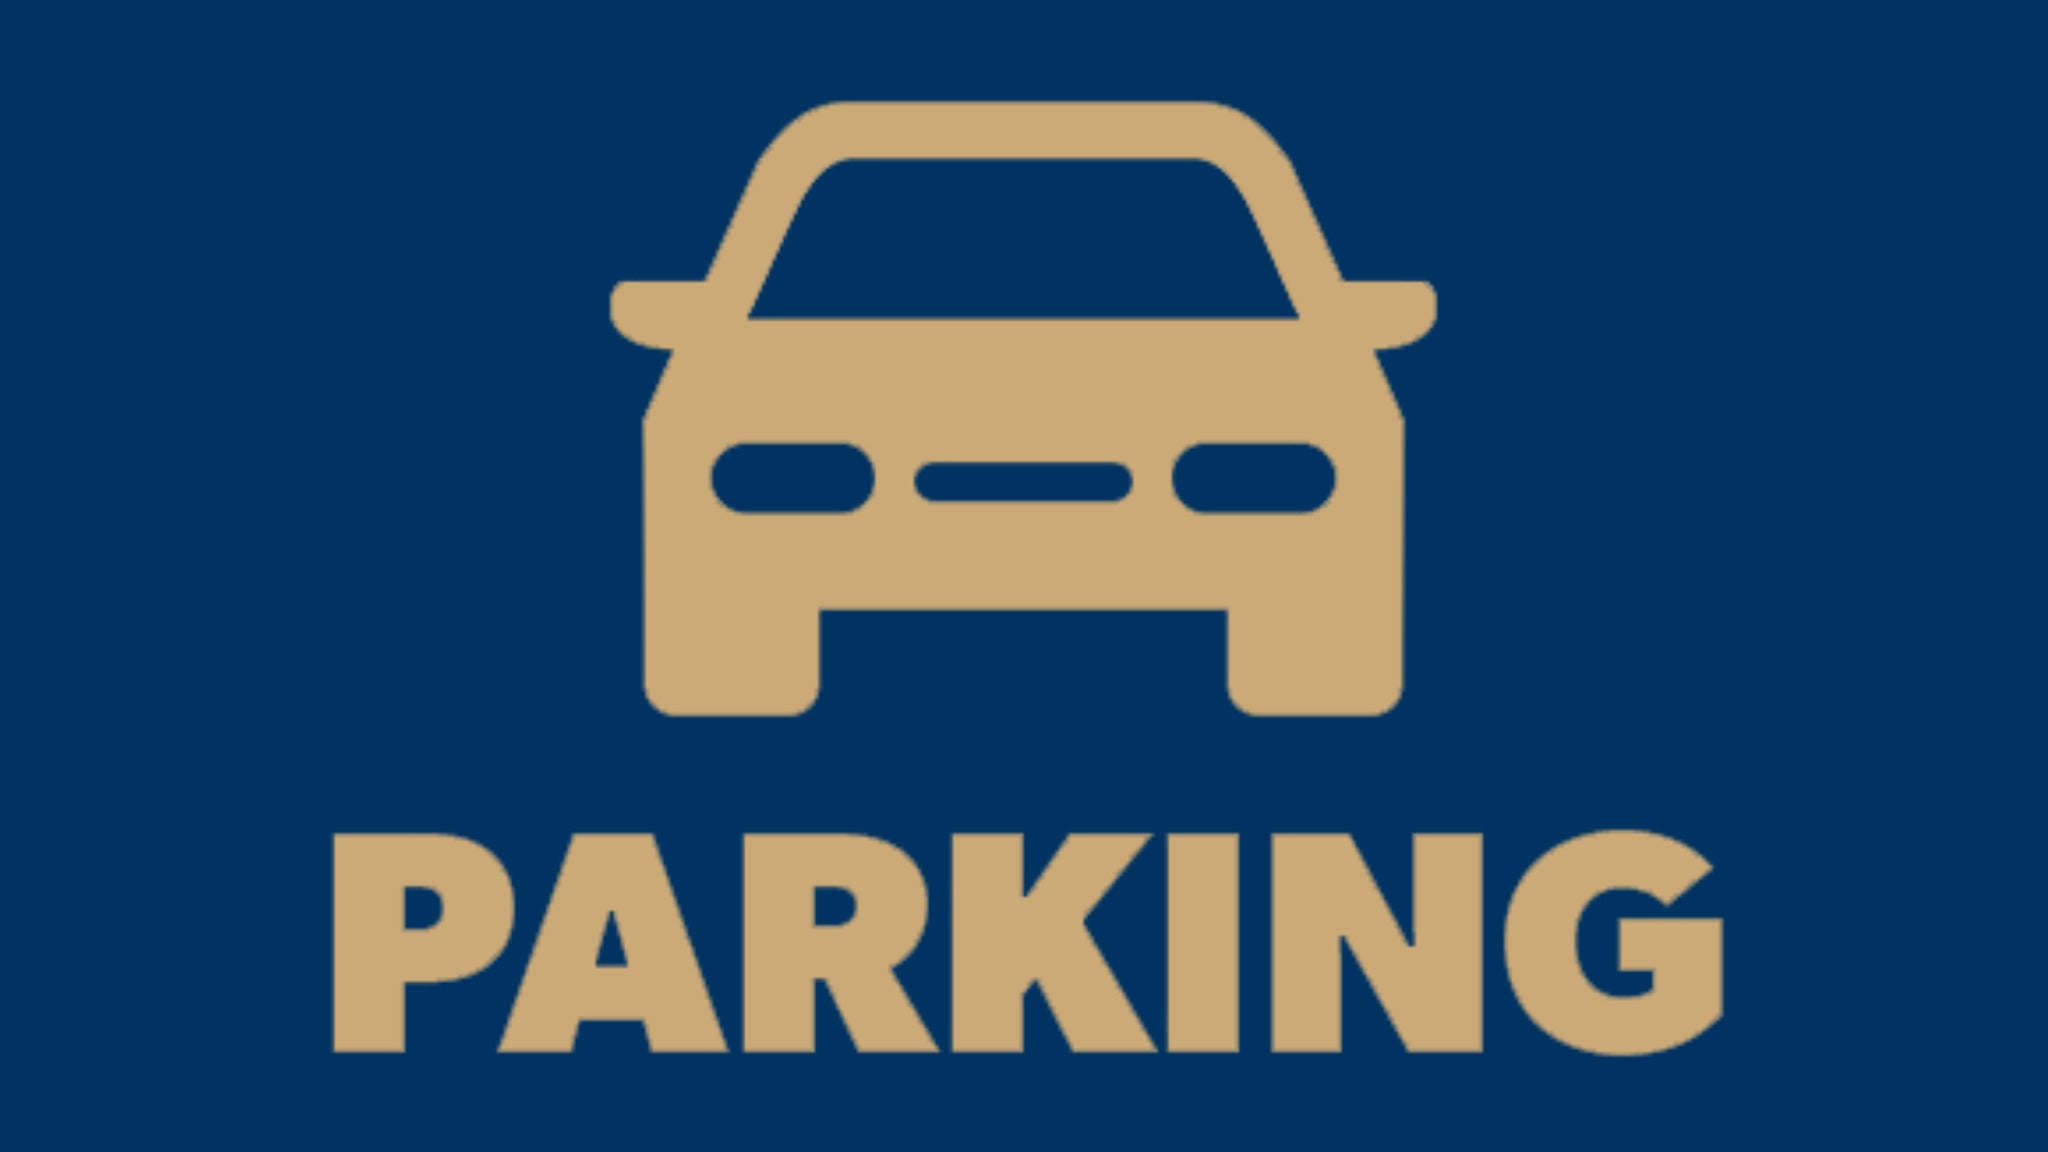 THE PLAYERS Championship - Friday Parking in Ponte Vedra Beach event information